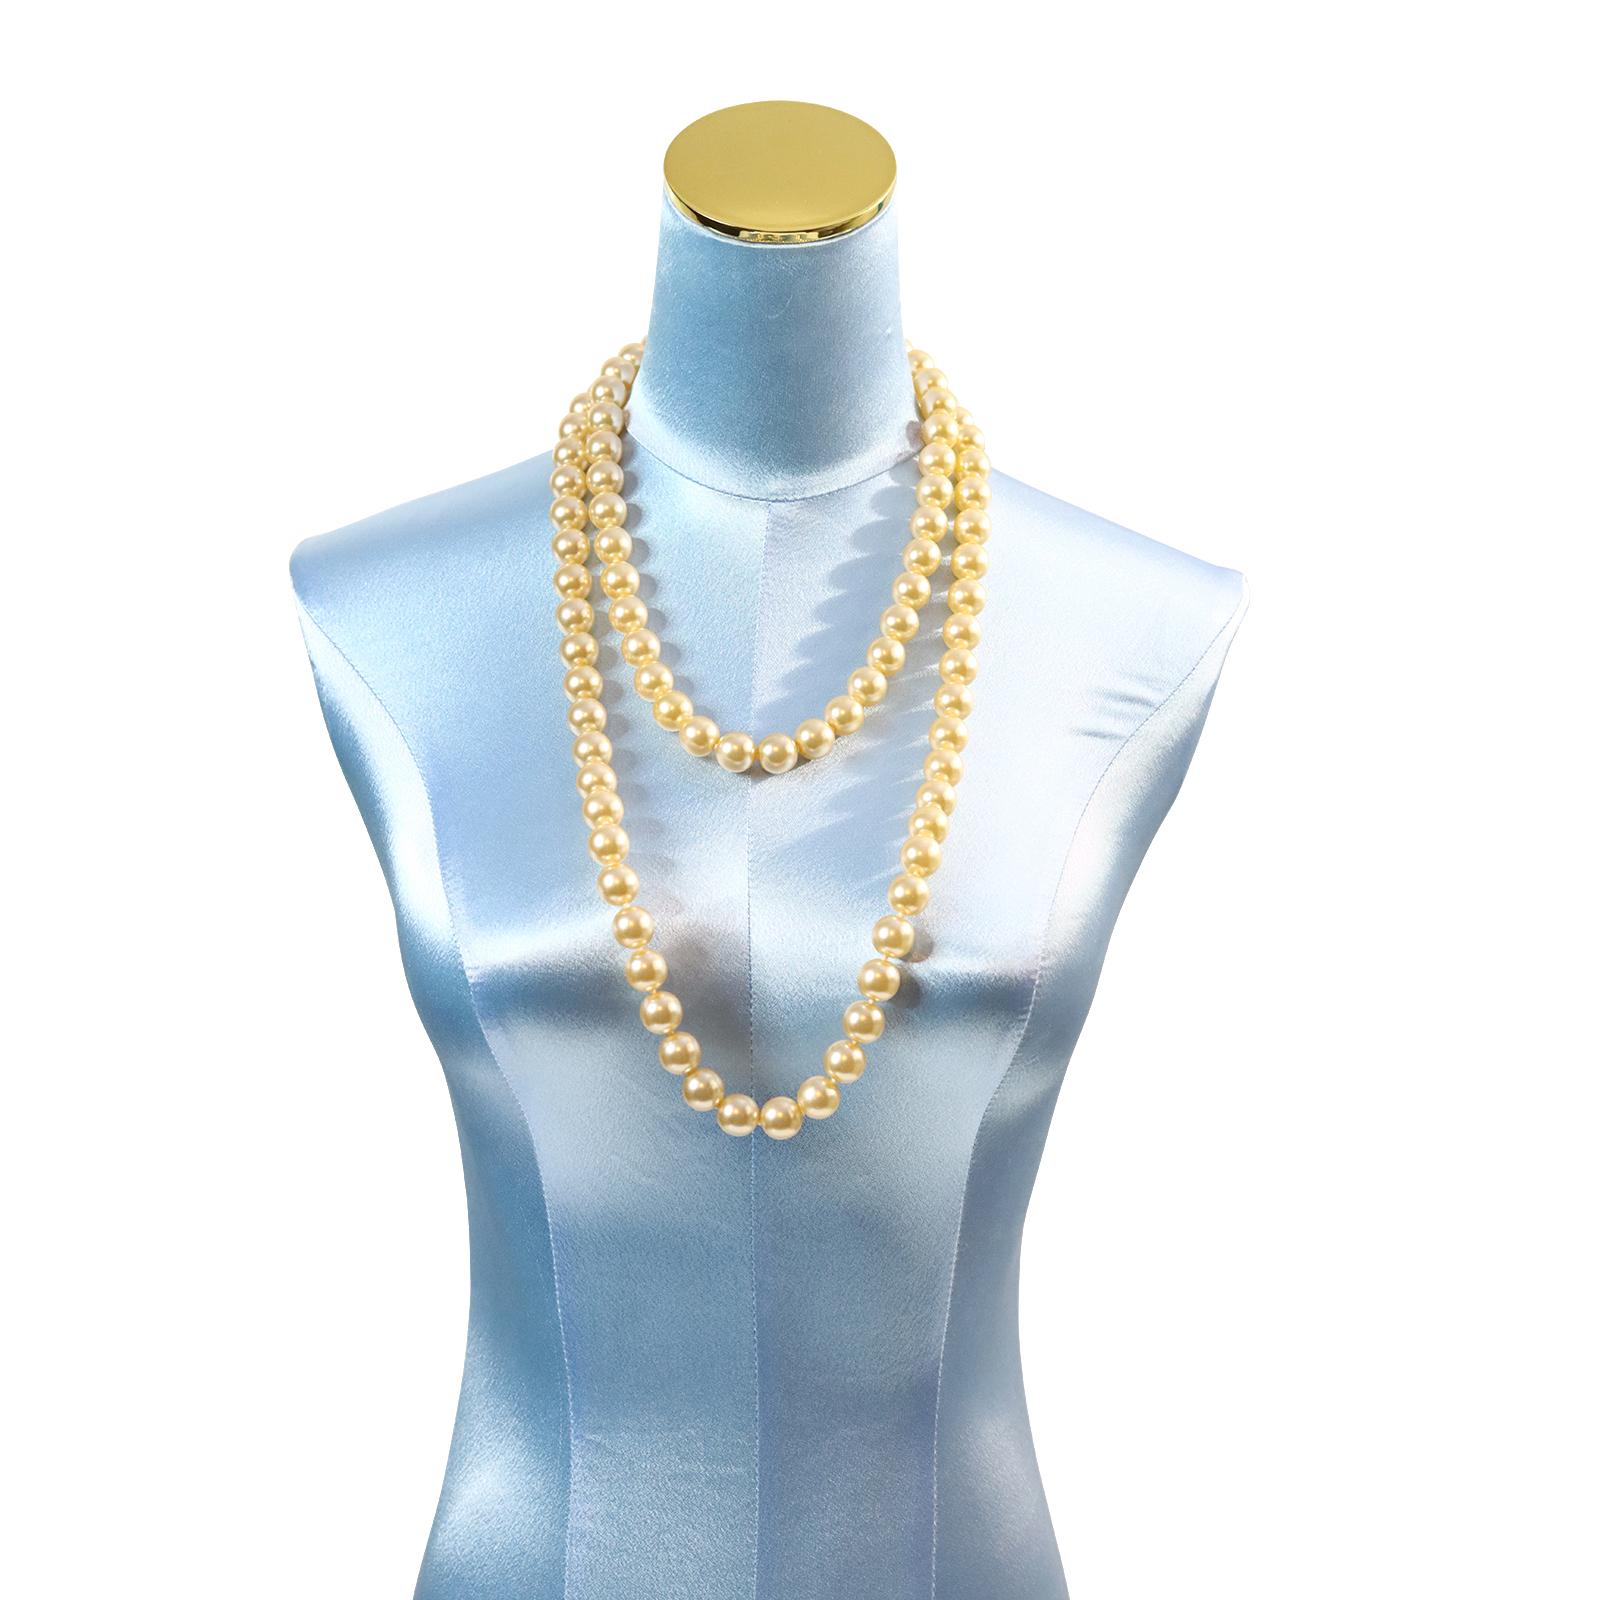 Vintage French Single Strand of Faux Pearls Necklace Circa 1980s In Good Condition For Sale In New York, NY